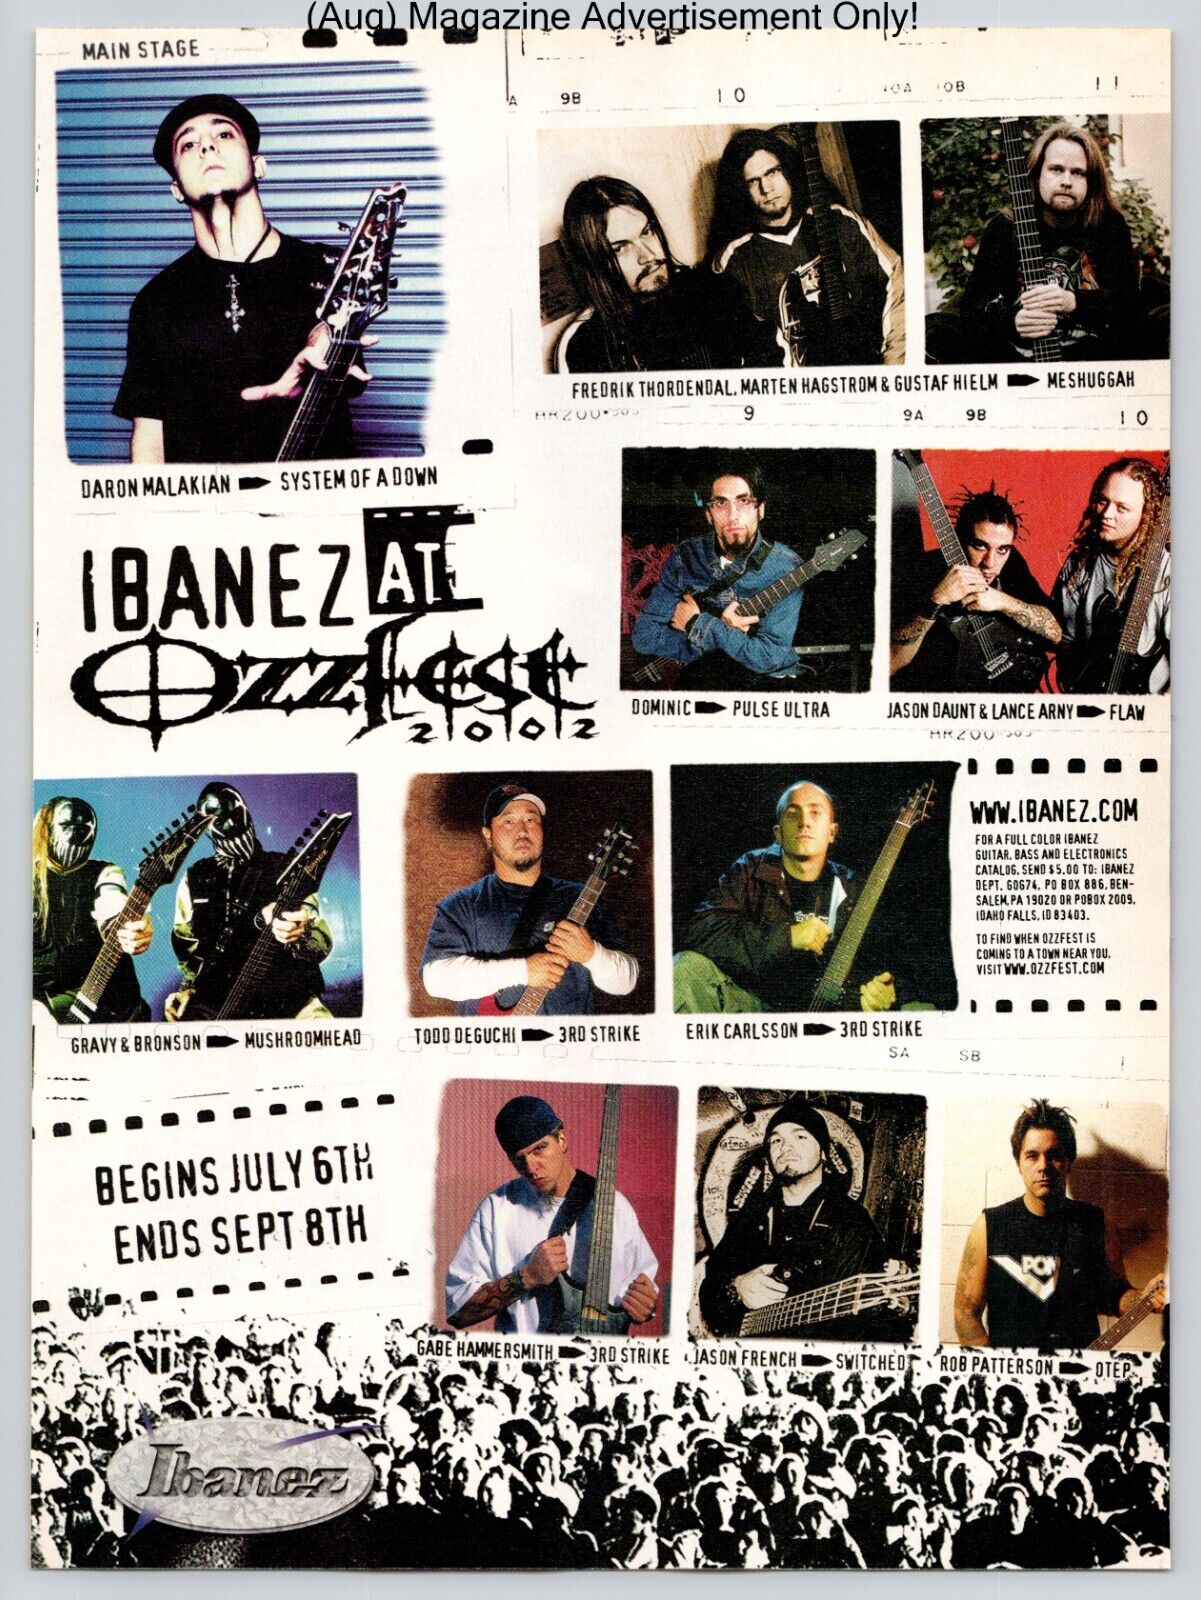 Ibanez Guitars At Ozzfest 2002 Promo 2002 Full Page Print Ad